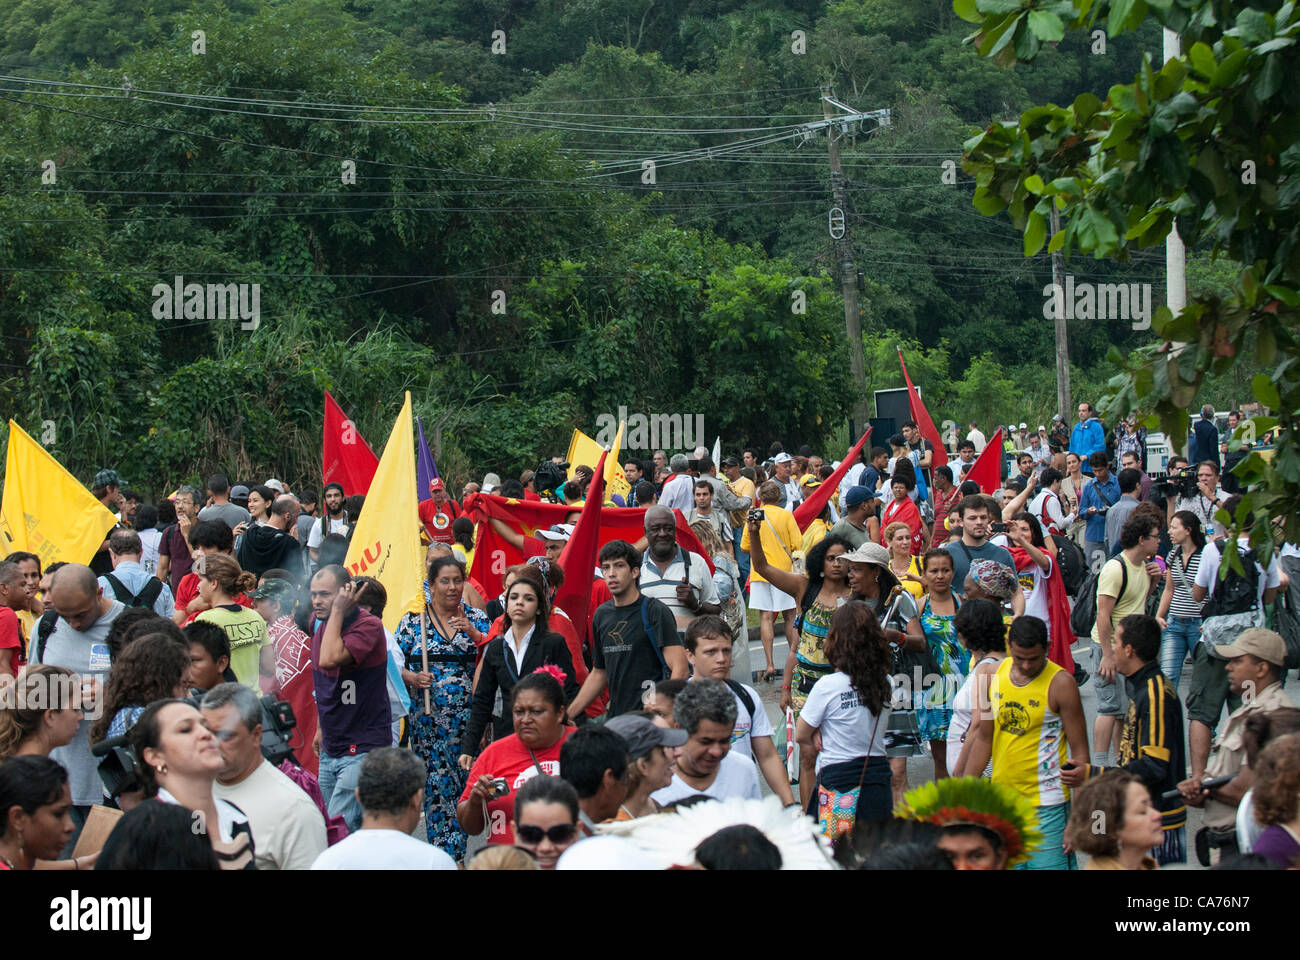 Rio de Janeiro, Brazil, 20th June 2012. A mass of demonstrators wave flags and banners during a demonstration by indigenous people, the Landless People's Movement (MST) and other civil society groups in front of the Riocentro United Nations conference. The demonstrators are kept out of earshot and invisible to the UN conference. The United Nations Conference on Sustainable Development (Rio+20), Rio de Janeiro, Brazil, 20th June 2012. Photo © Sue Cunningham. Stock Photo